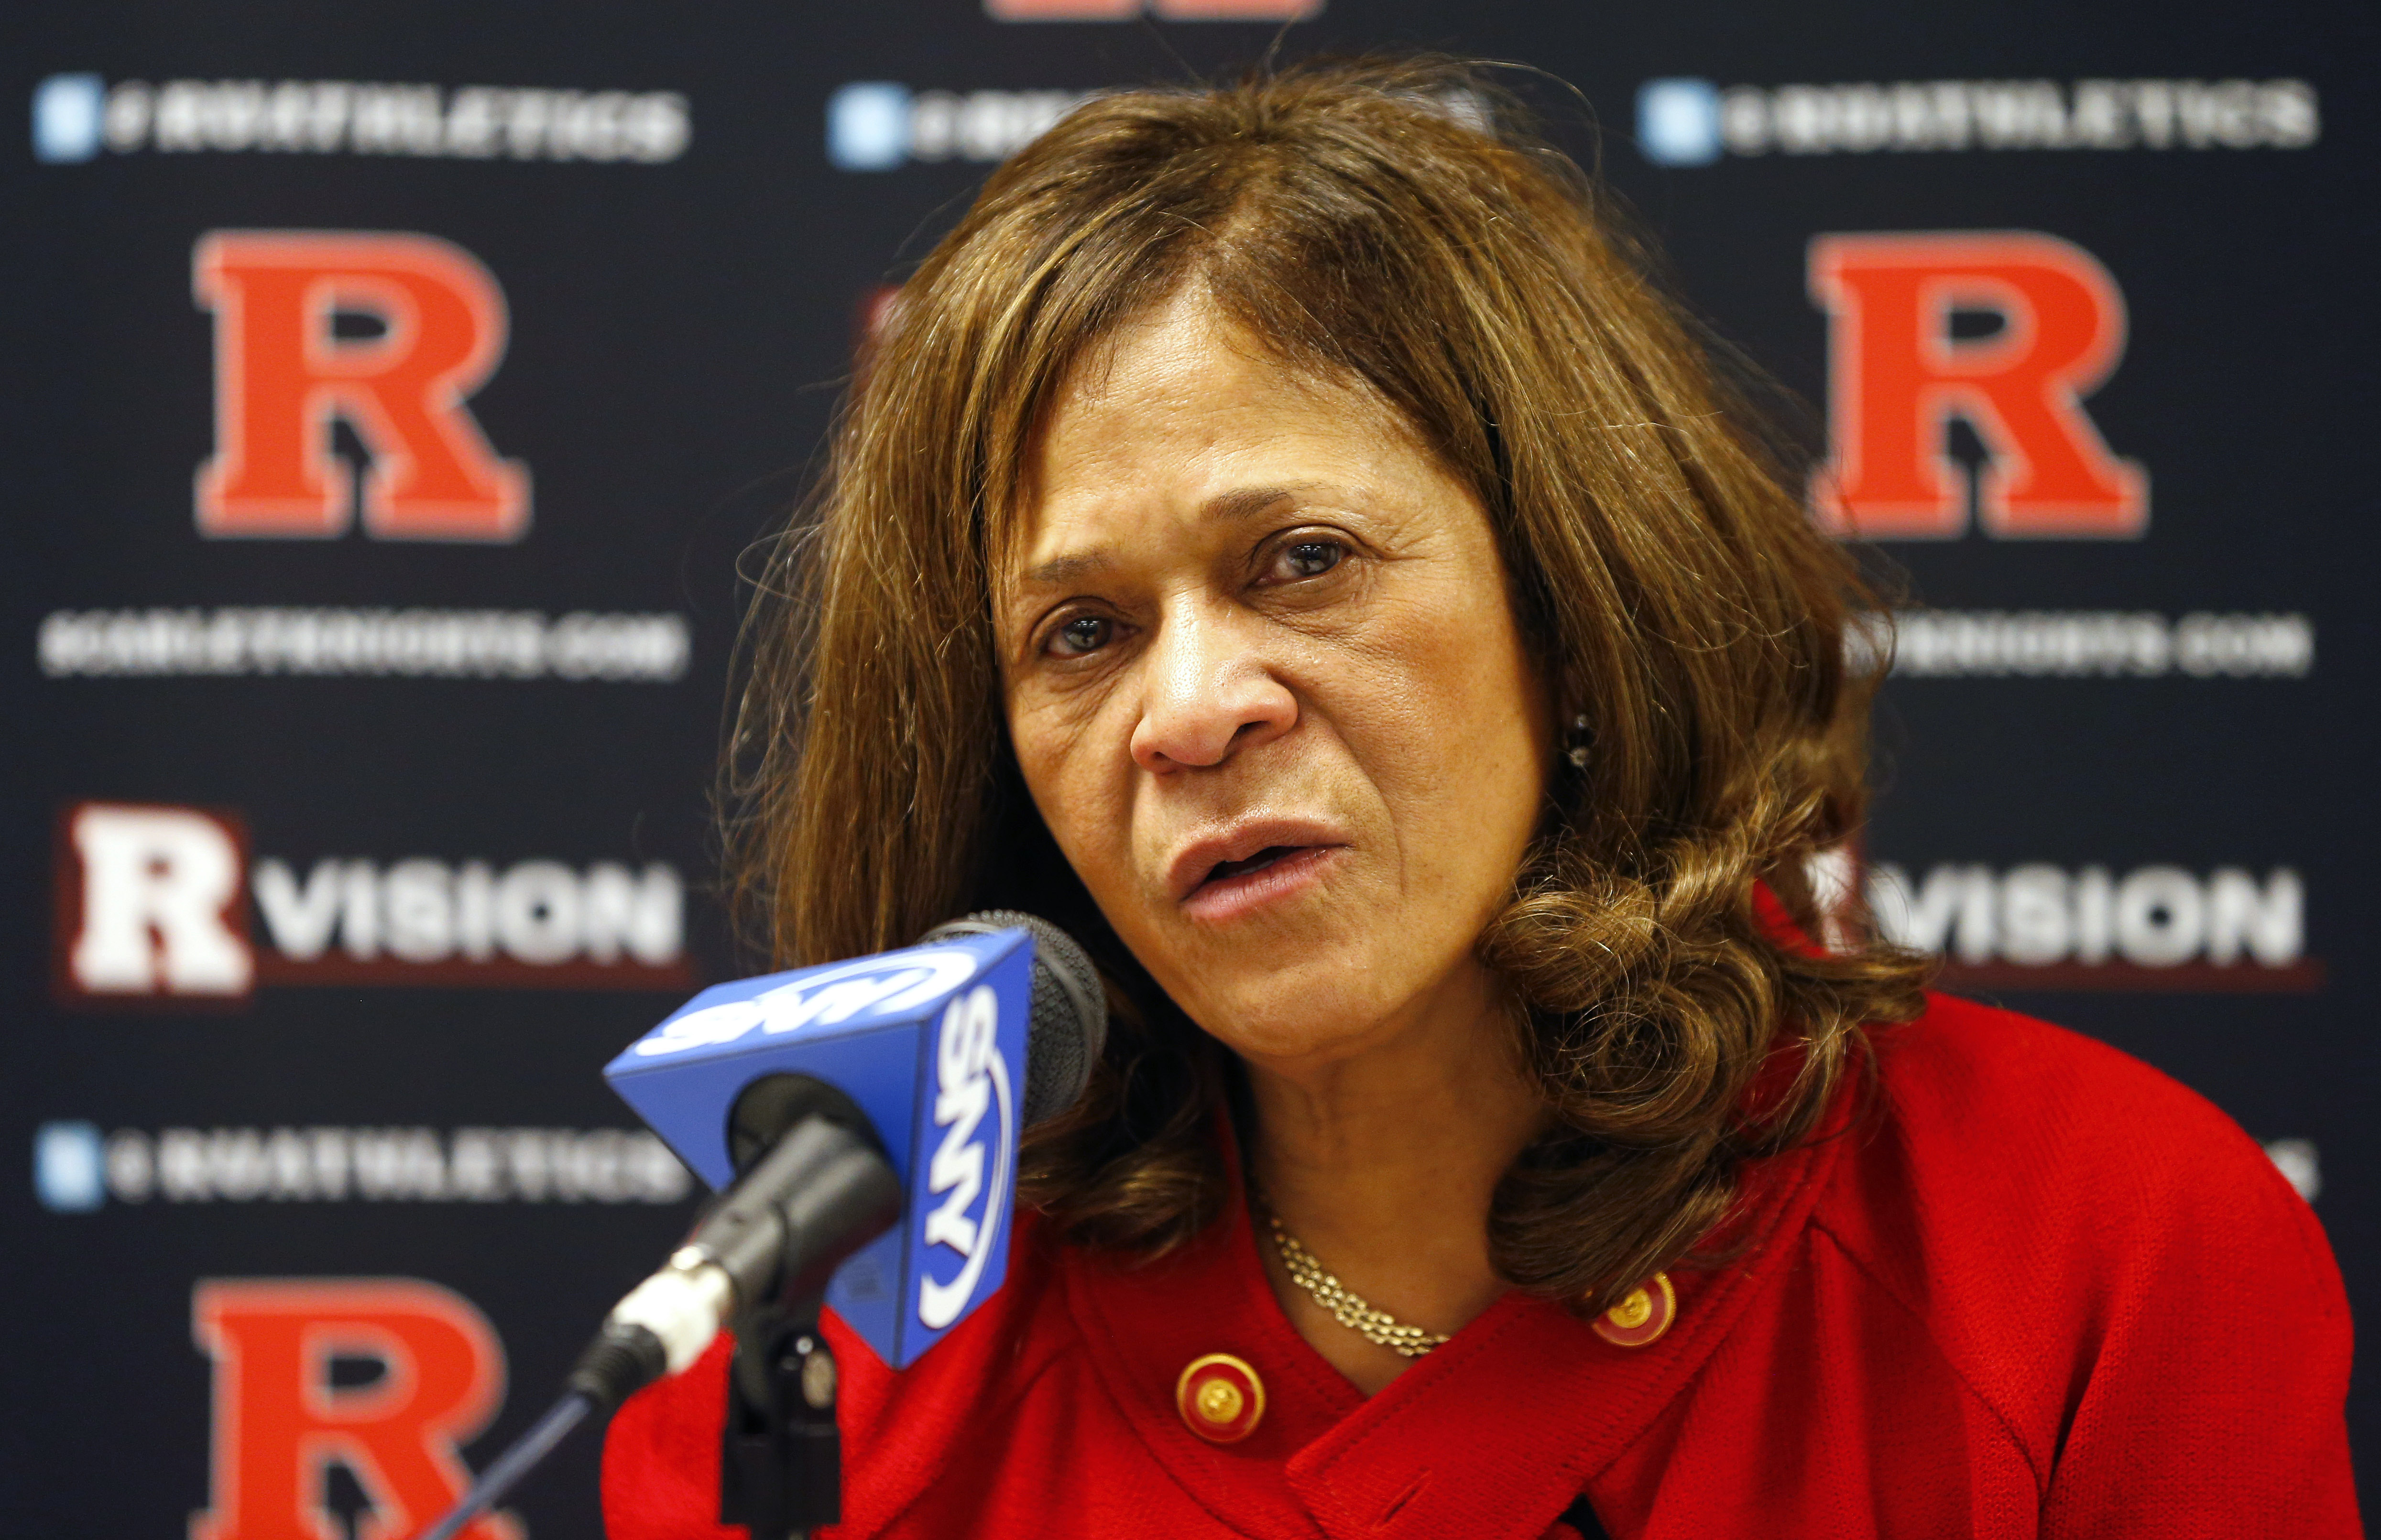 PISCATAWAY, NJ - FEBRUARY 26: Head coach C. Vivian Stringer of the Rutgers Scarlet Knights talks during her post game press conference after defeating the South Florida Bulls 68-56 in a game at the Louis Brown Athletic Center on February 26, 2013 in Piscataway, New Jersey. The win was Stringers' 900th in her career. (Photo by Rich Schultz /Getty Images)